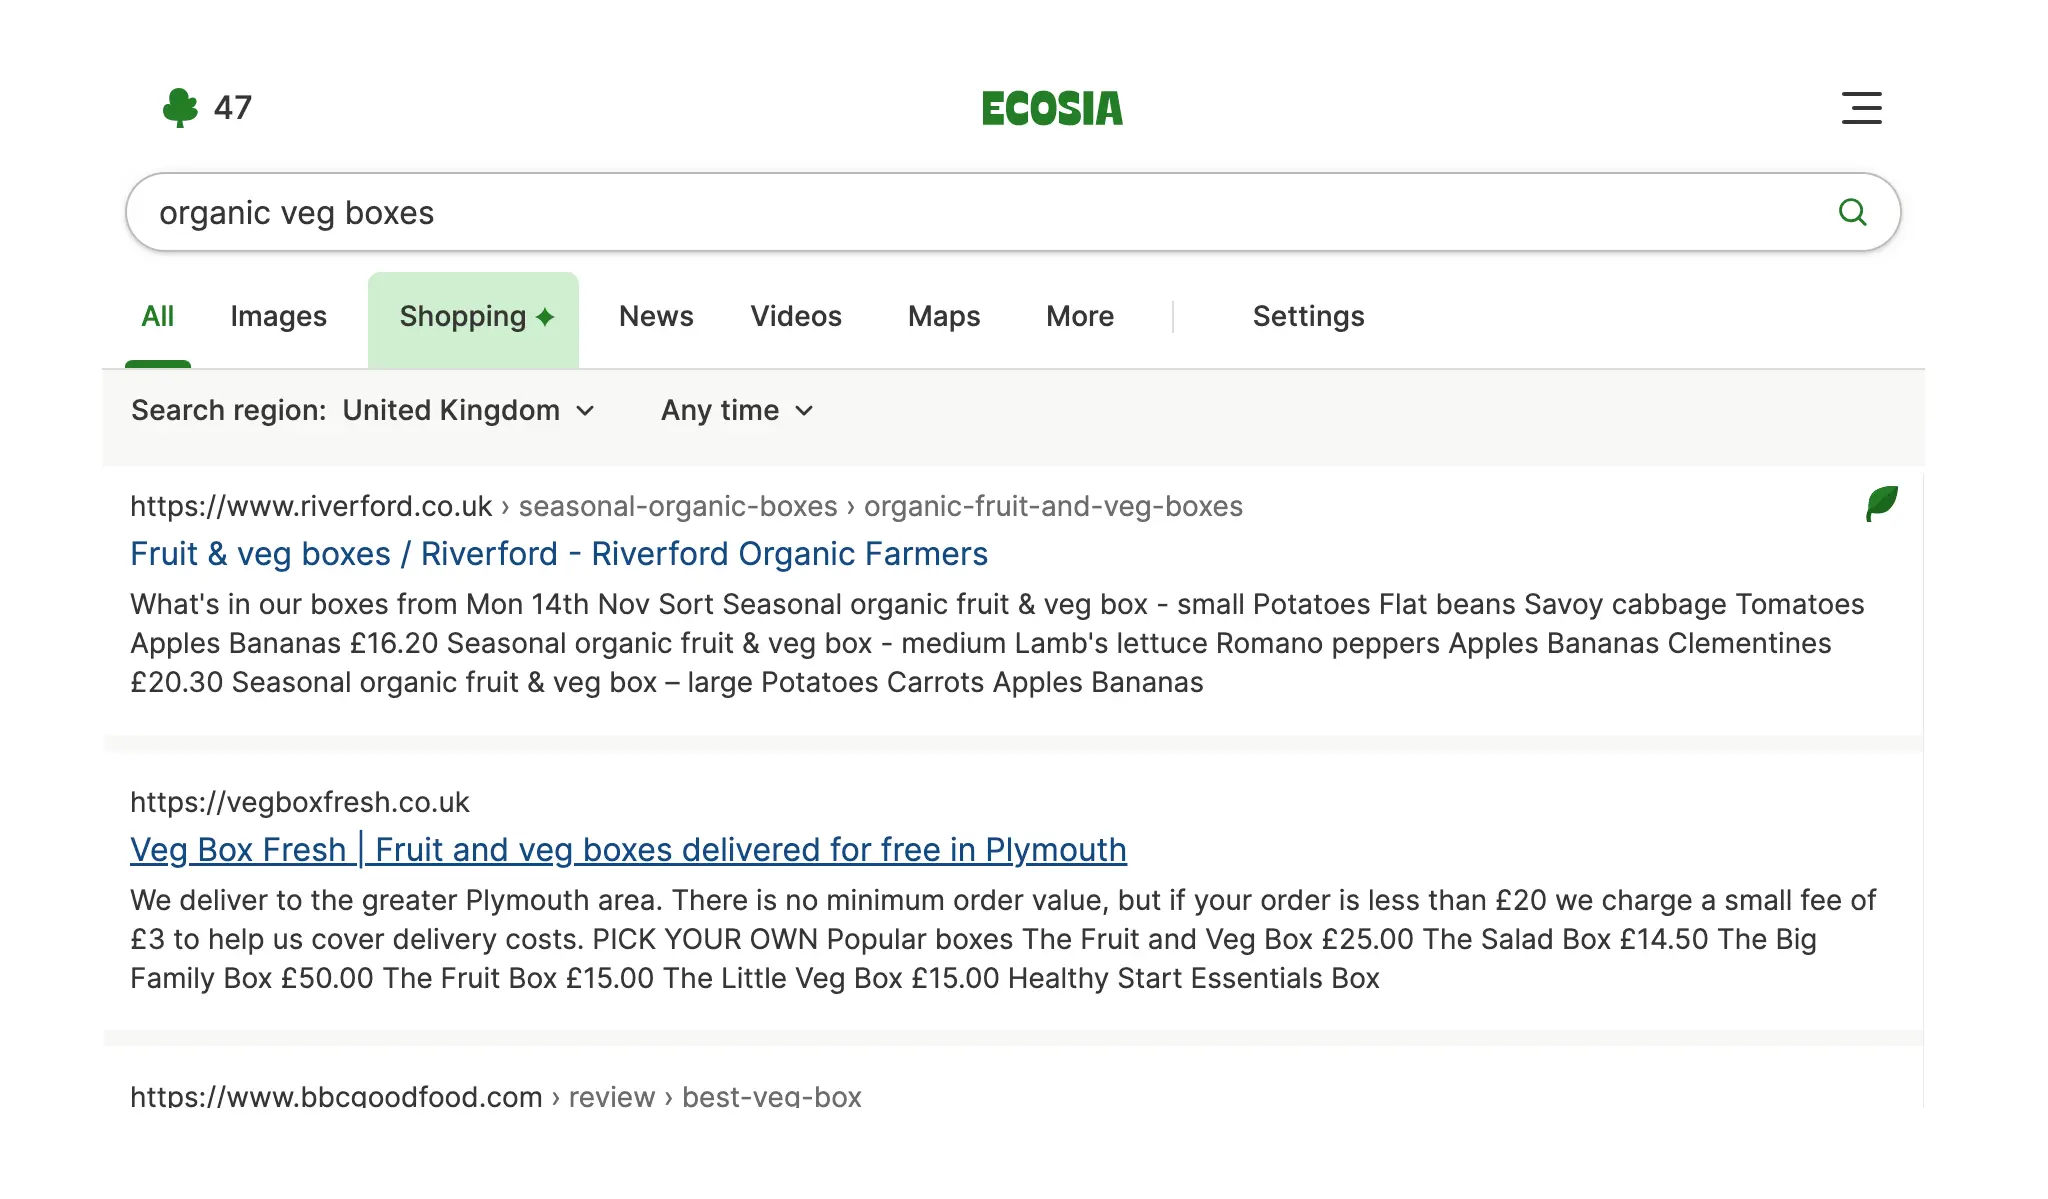 Ecosia search results showing the green leaf icon